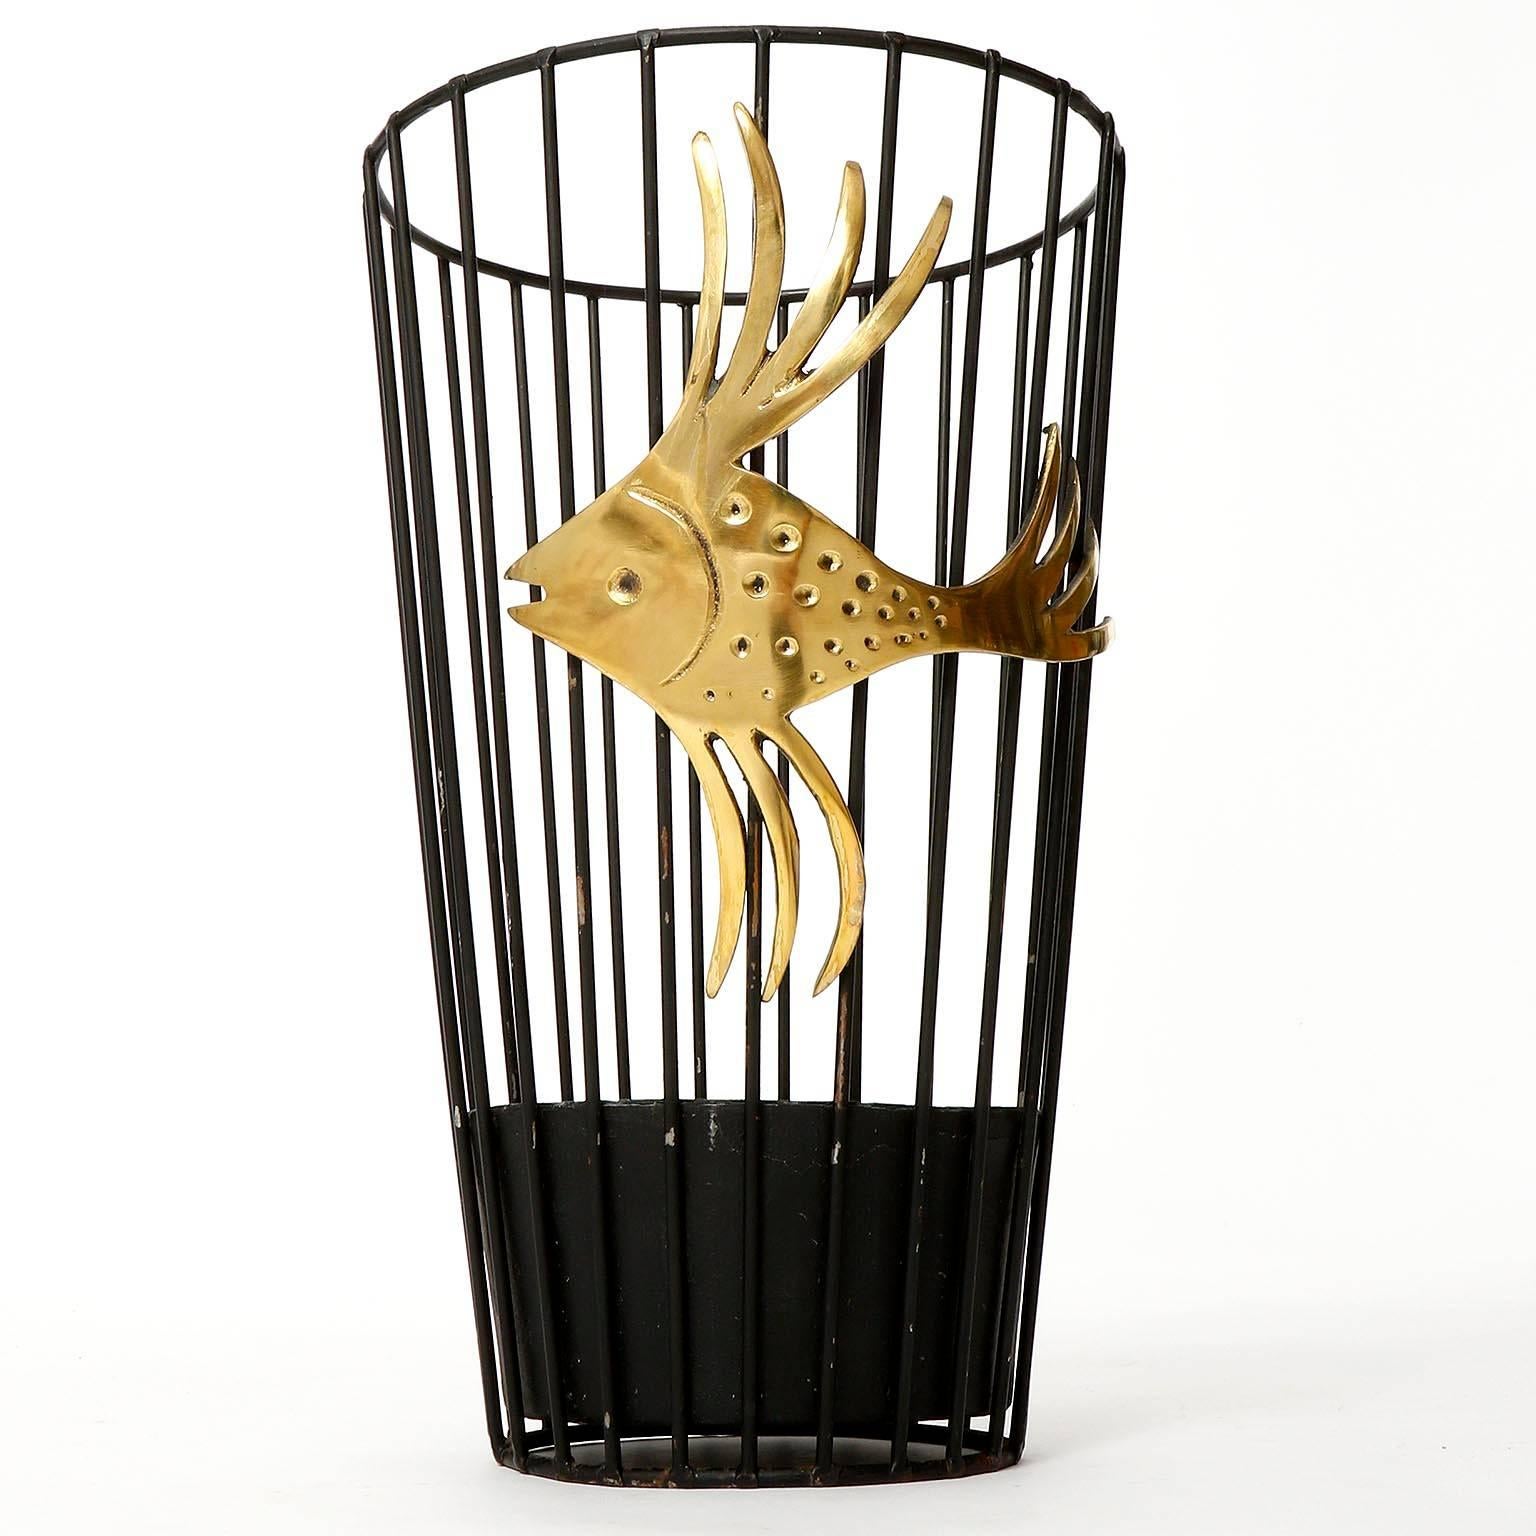 A beautiful umbrella stand by Walter Bosse, Vienna, manufactured in midcentury in circa 1950.
It is made of a black painted metal base and a polished brass goldfish with nice patina.